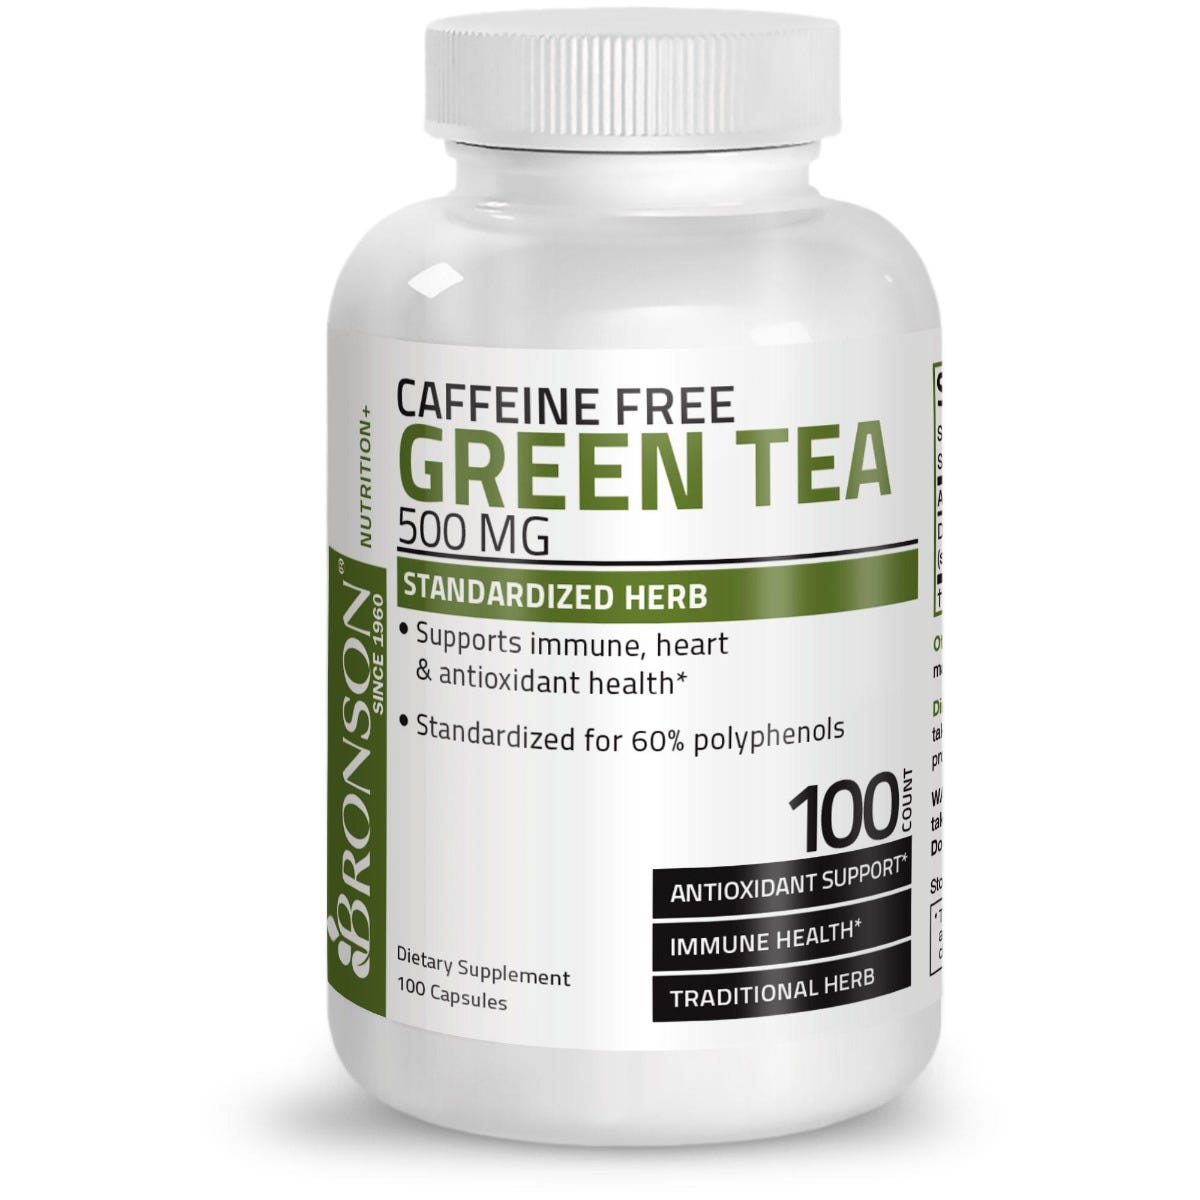 Caffeine Free Green Tea Extract - 500 mg - 100 Capsules view 1 of 5